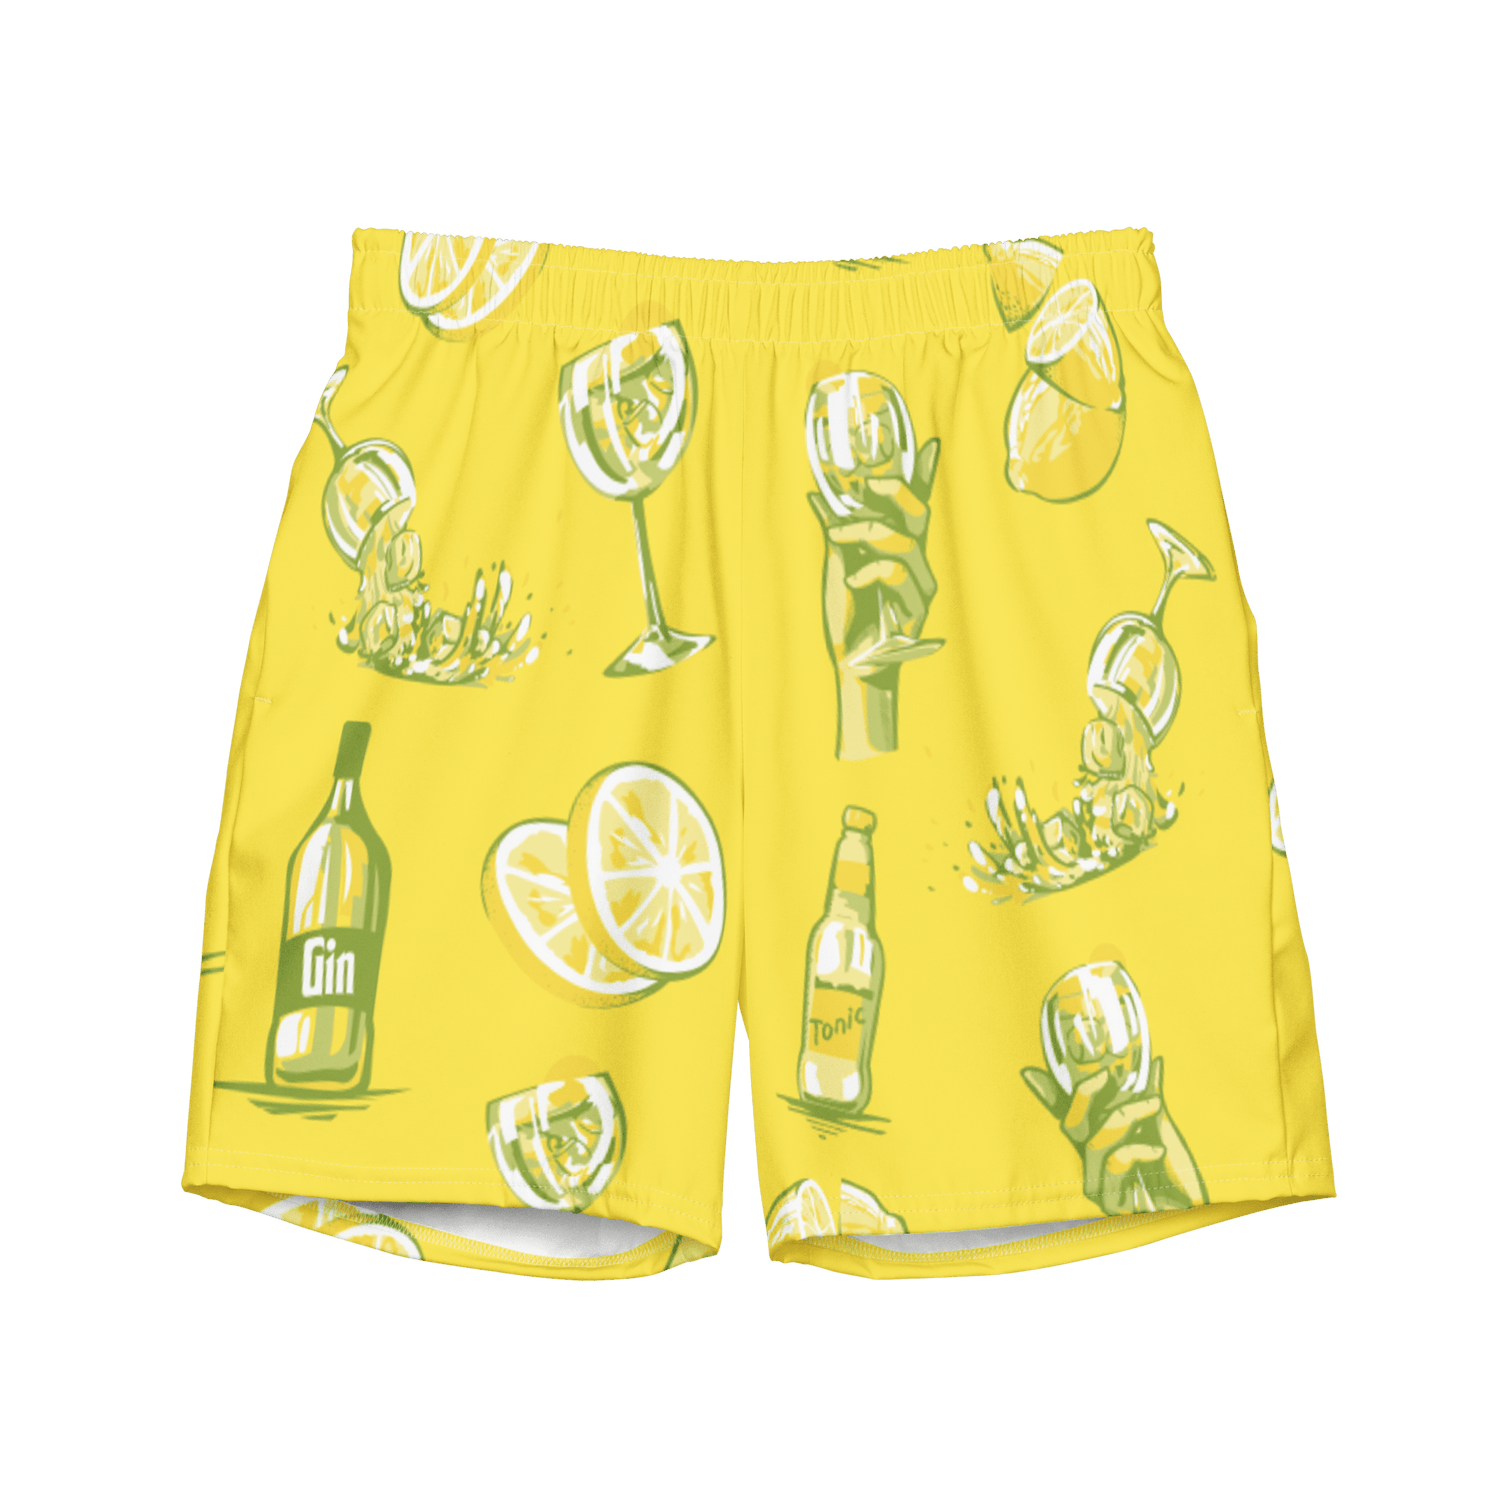 The Gin and Tonic Swim Trunks